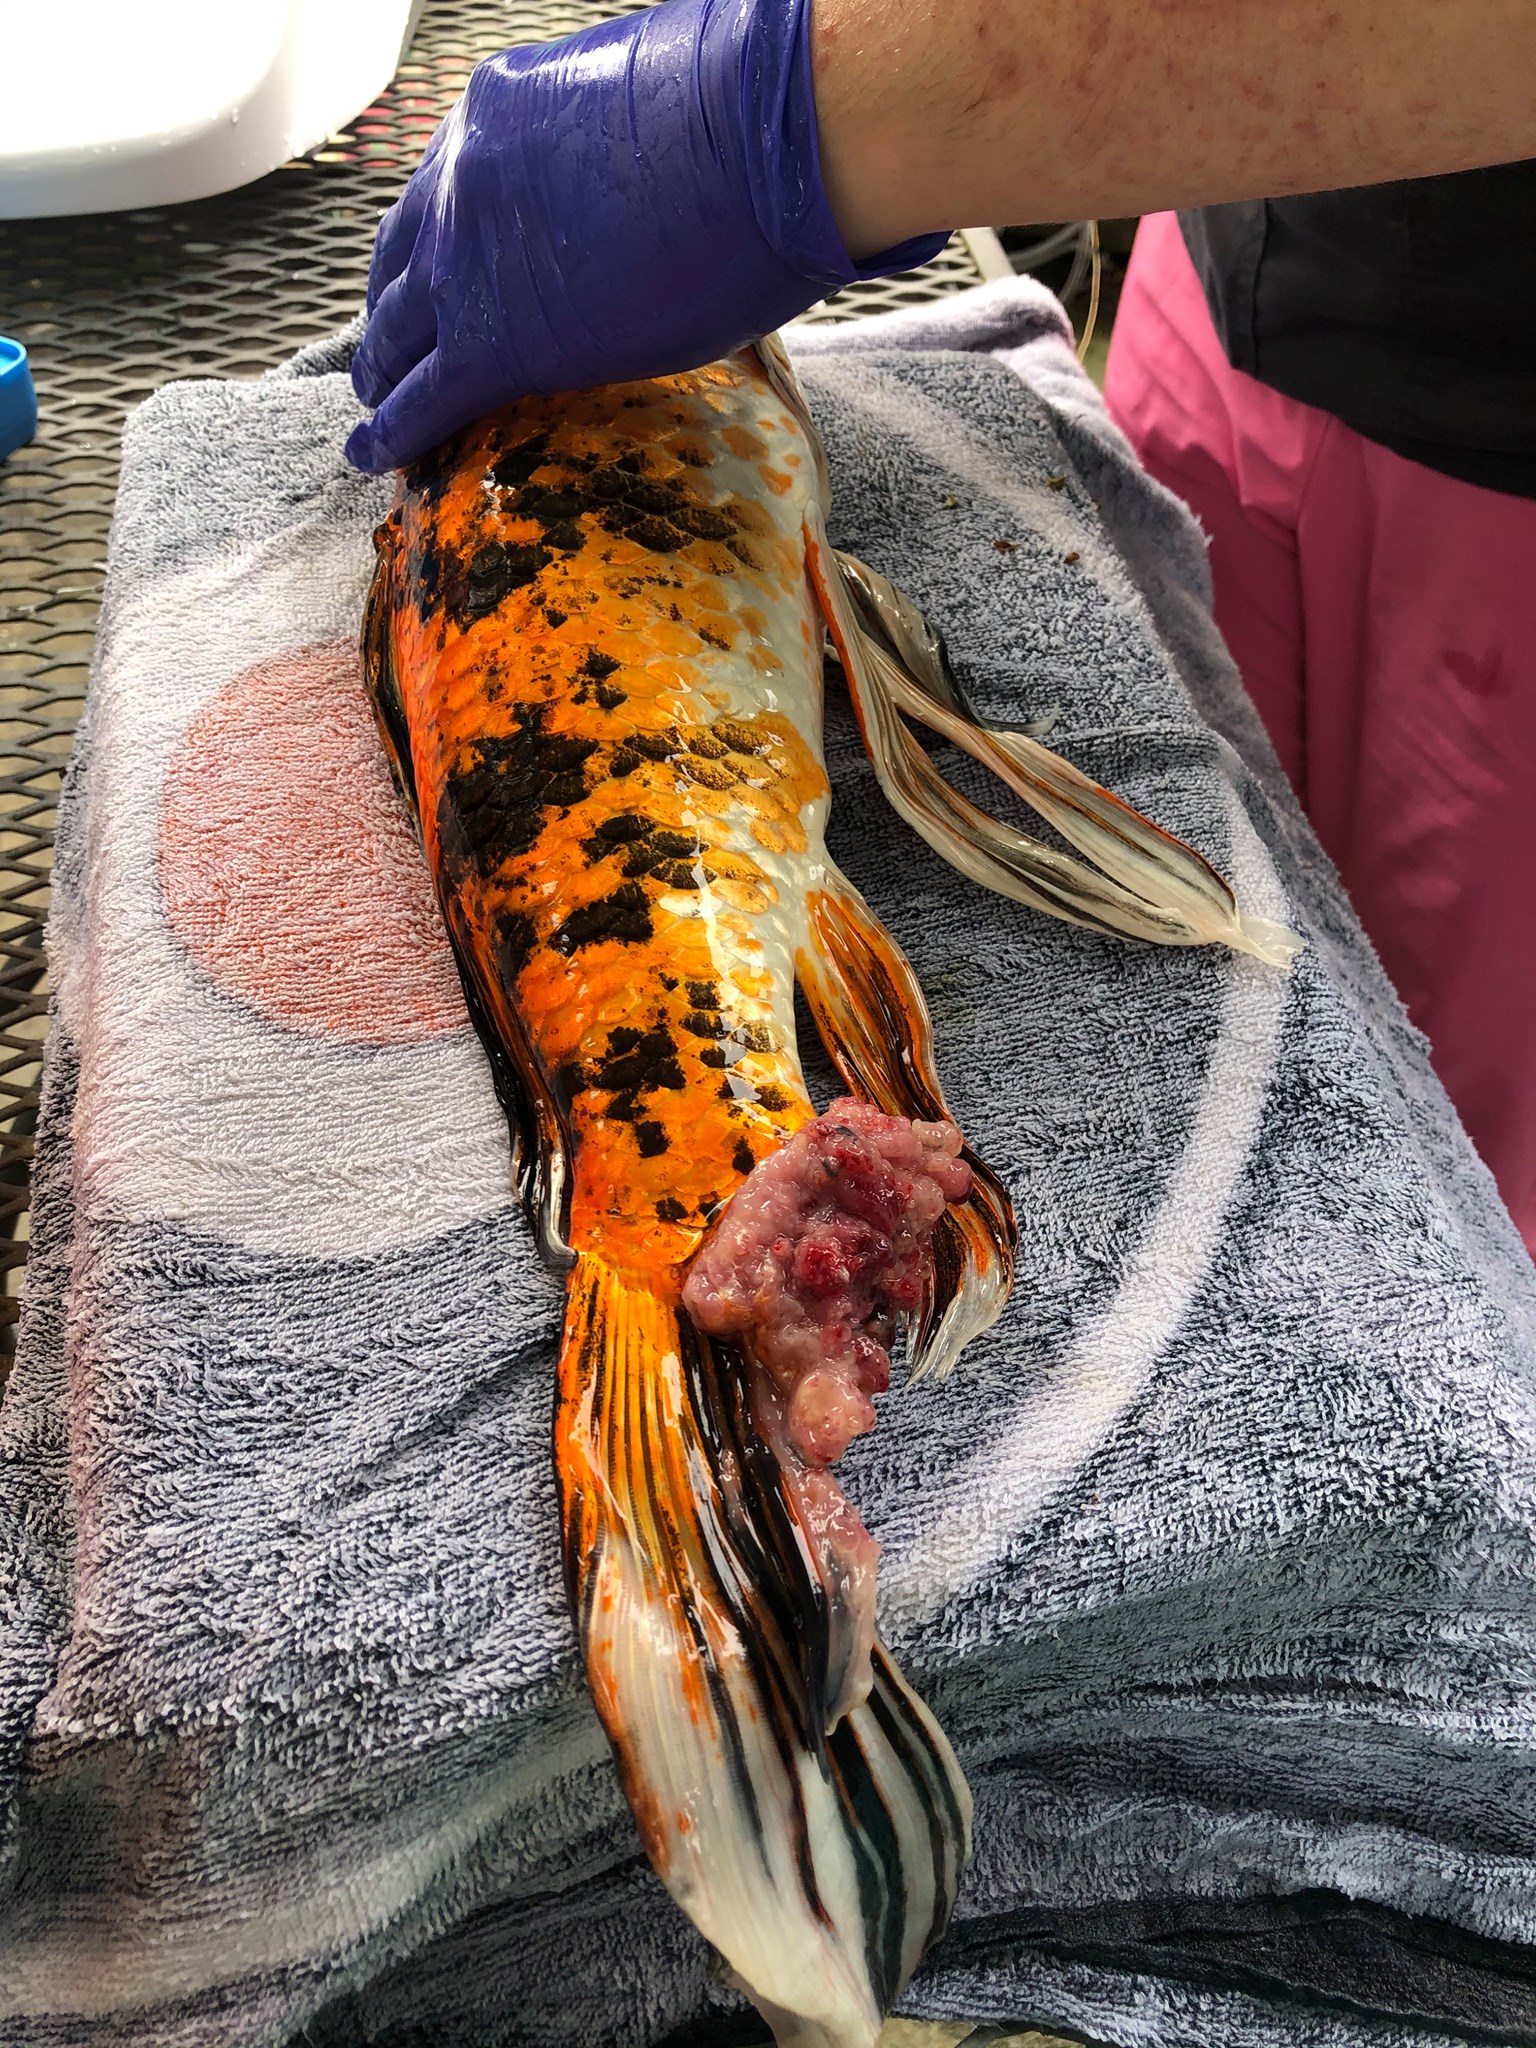 Pet koi comforts fish partner after she undergoes surgery to remove